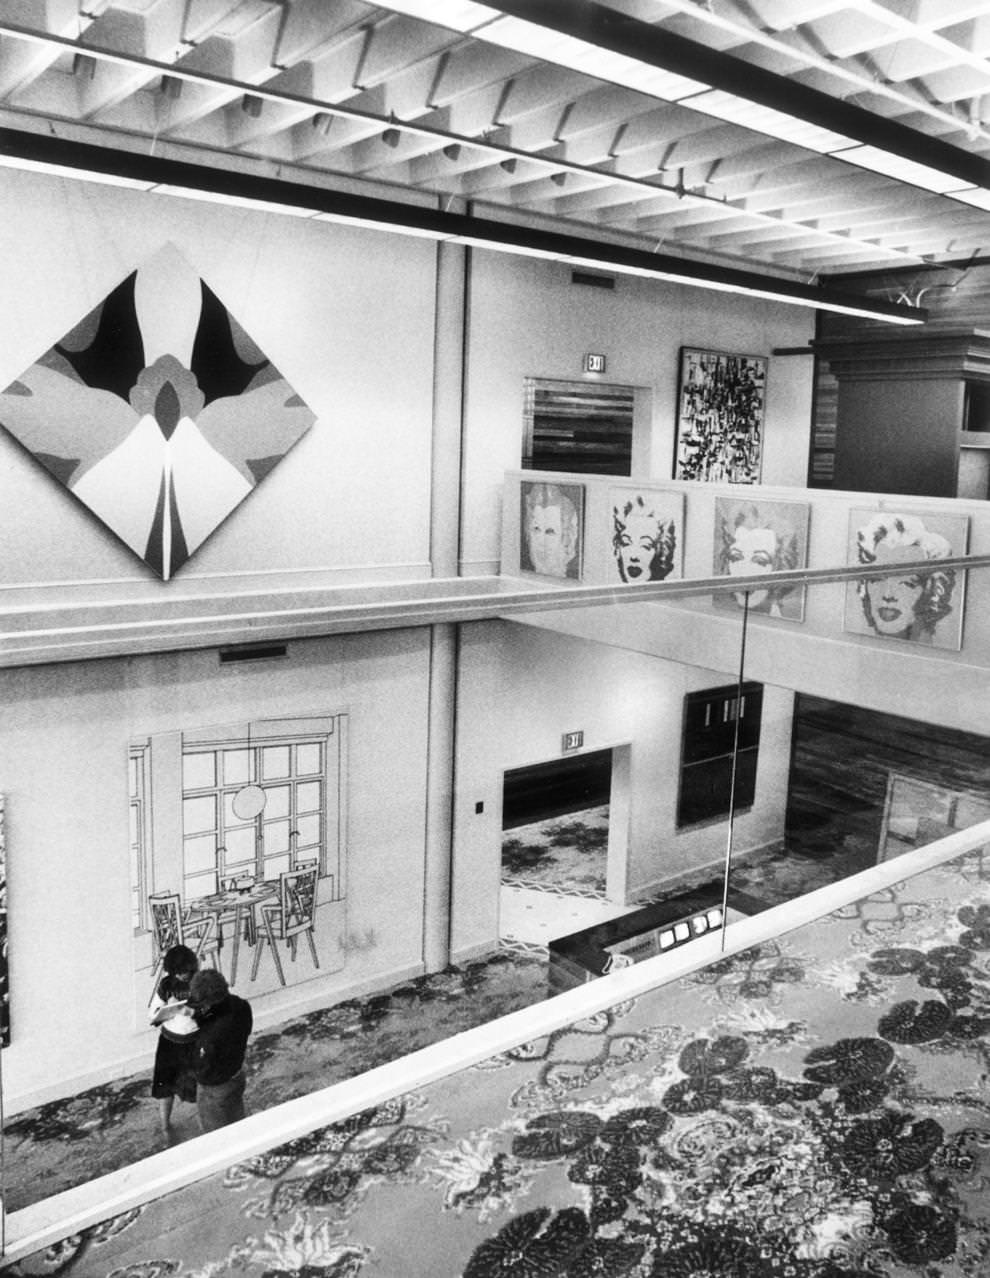 The interior of Best Products Co.’s headquarters at Interstate 95 and Parham Road in Henrico County, 1980.